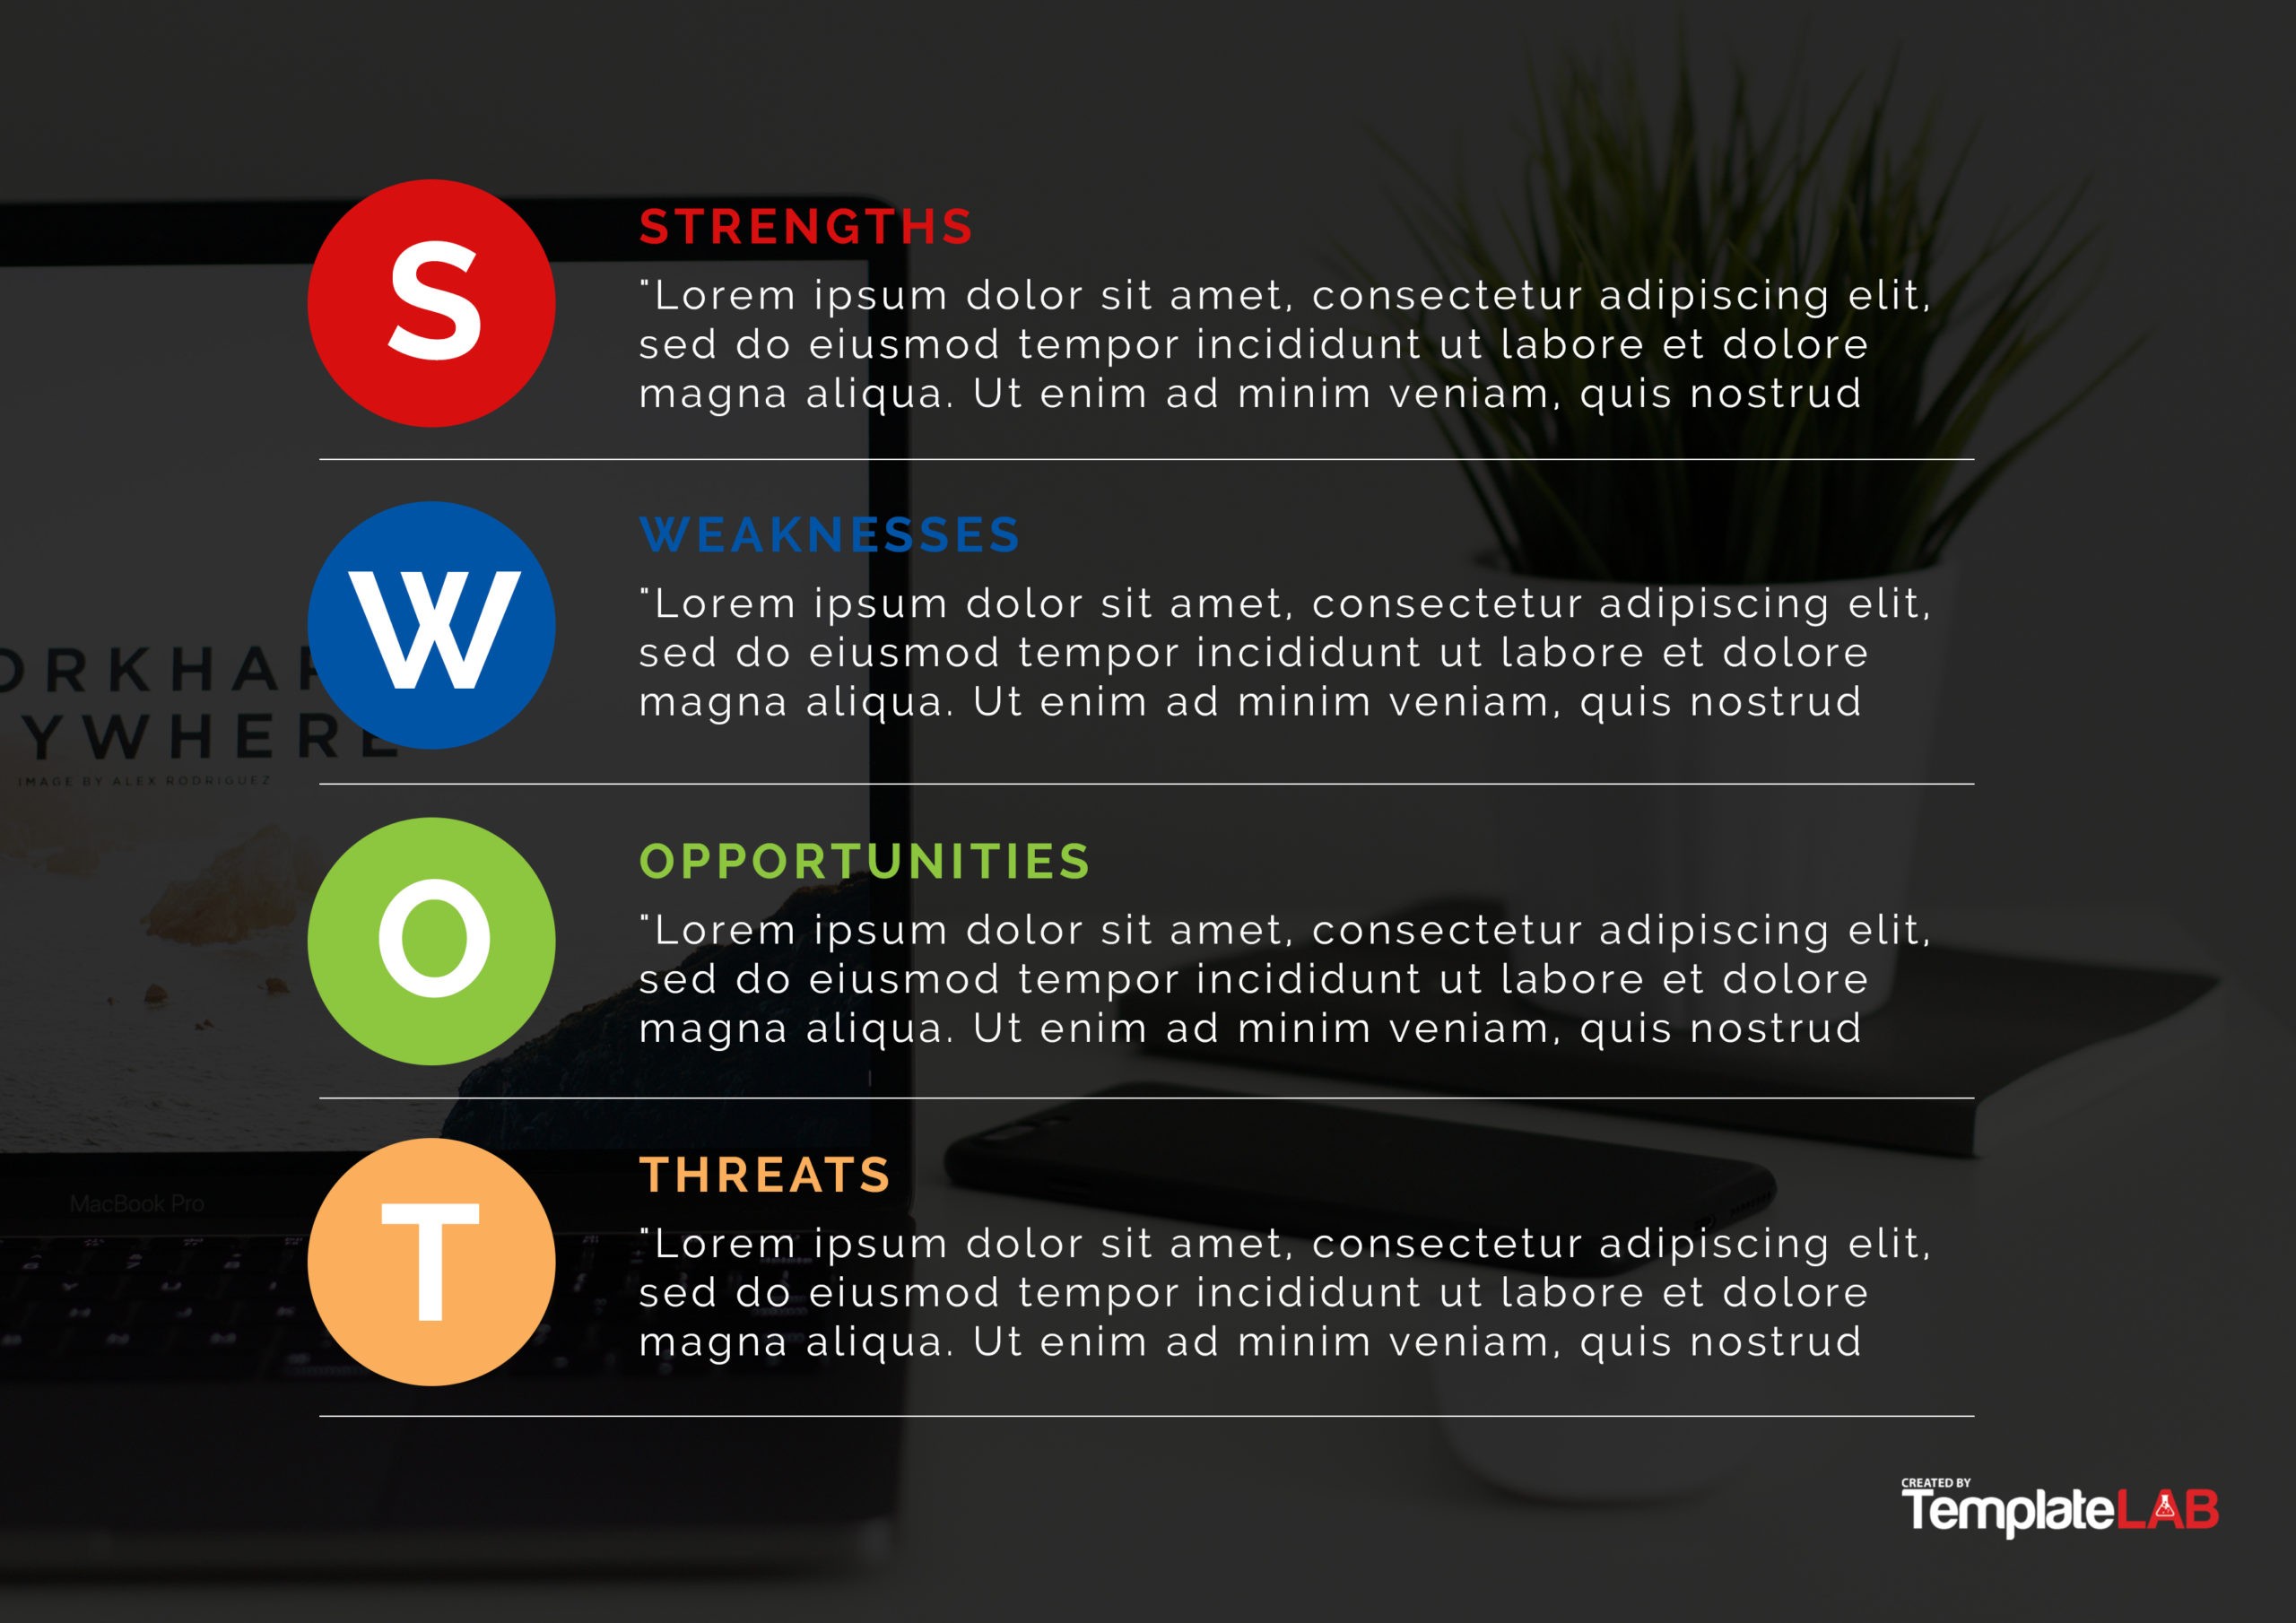 swot examples for business plan